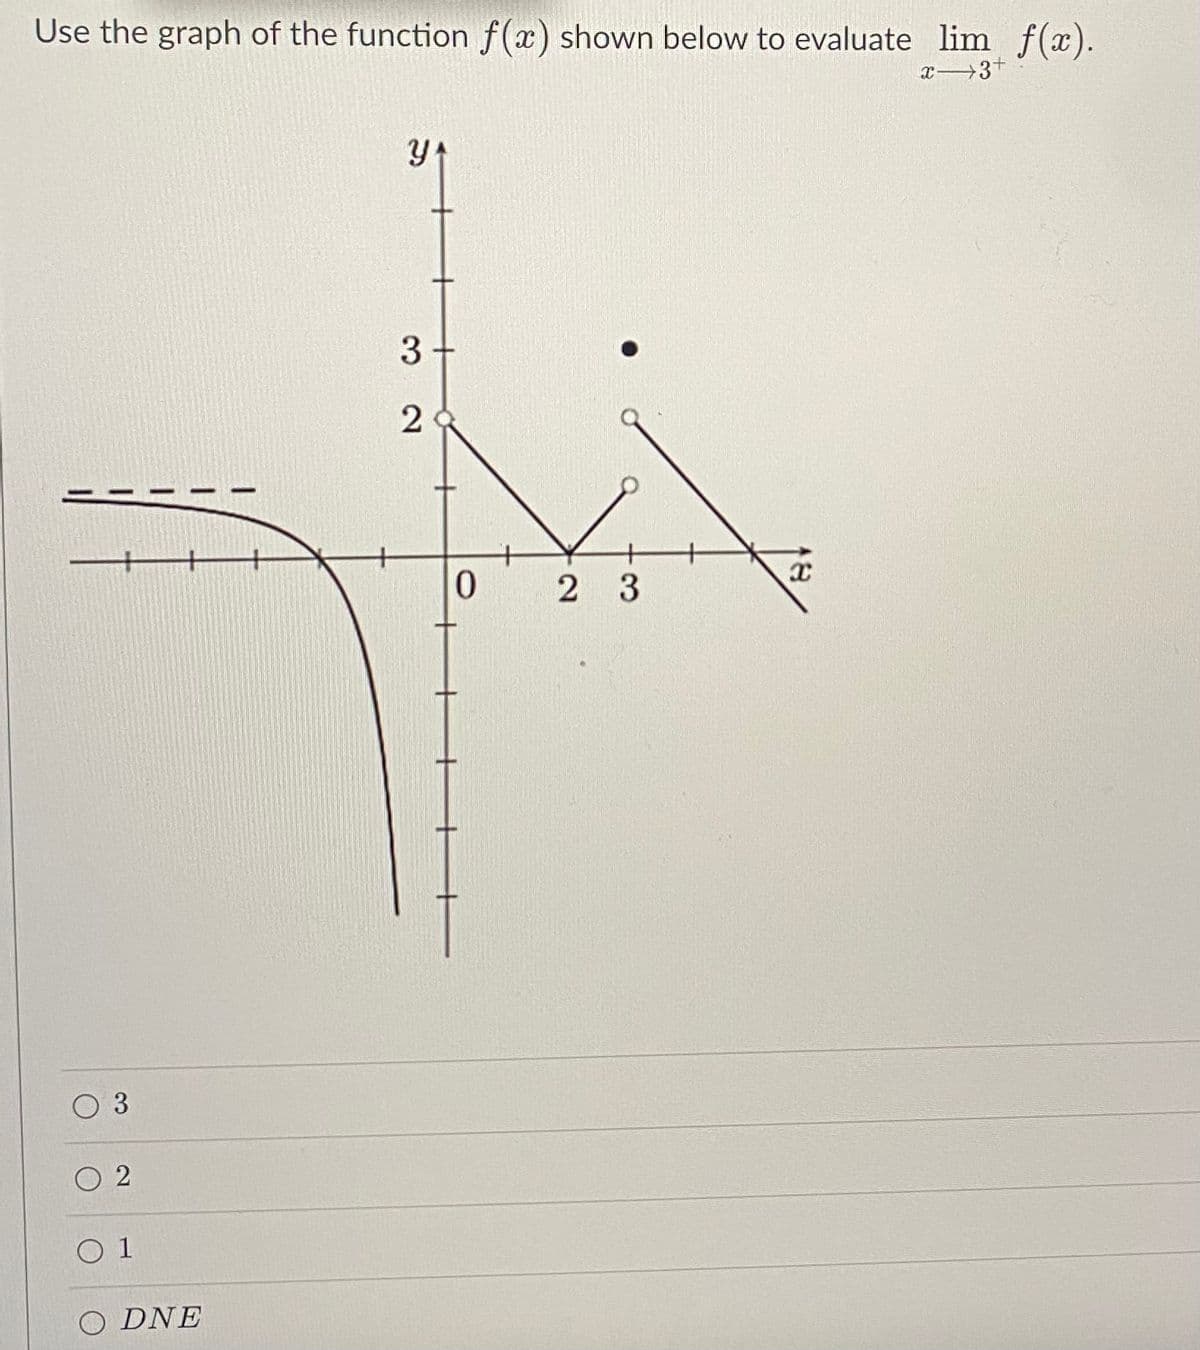 Use the graph of the function f(x) shown below to evaluate lim f(x).
x 3+
3
2 3
3
O 1
O DNE
2.
